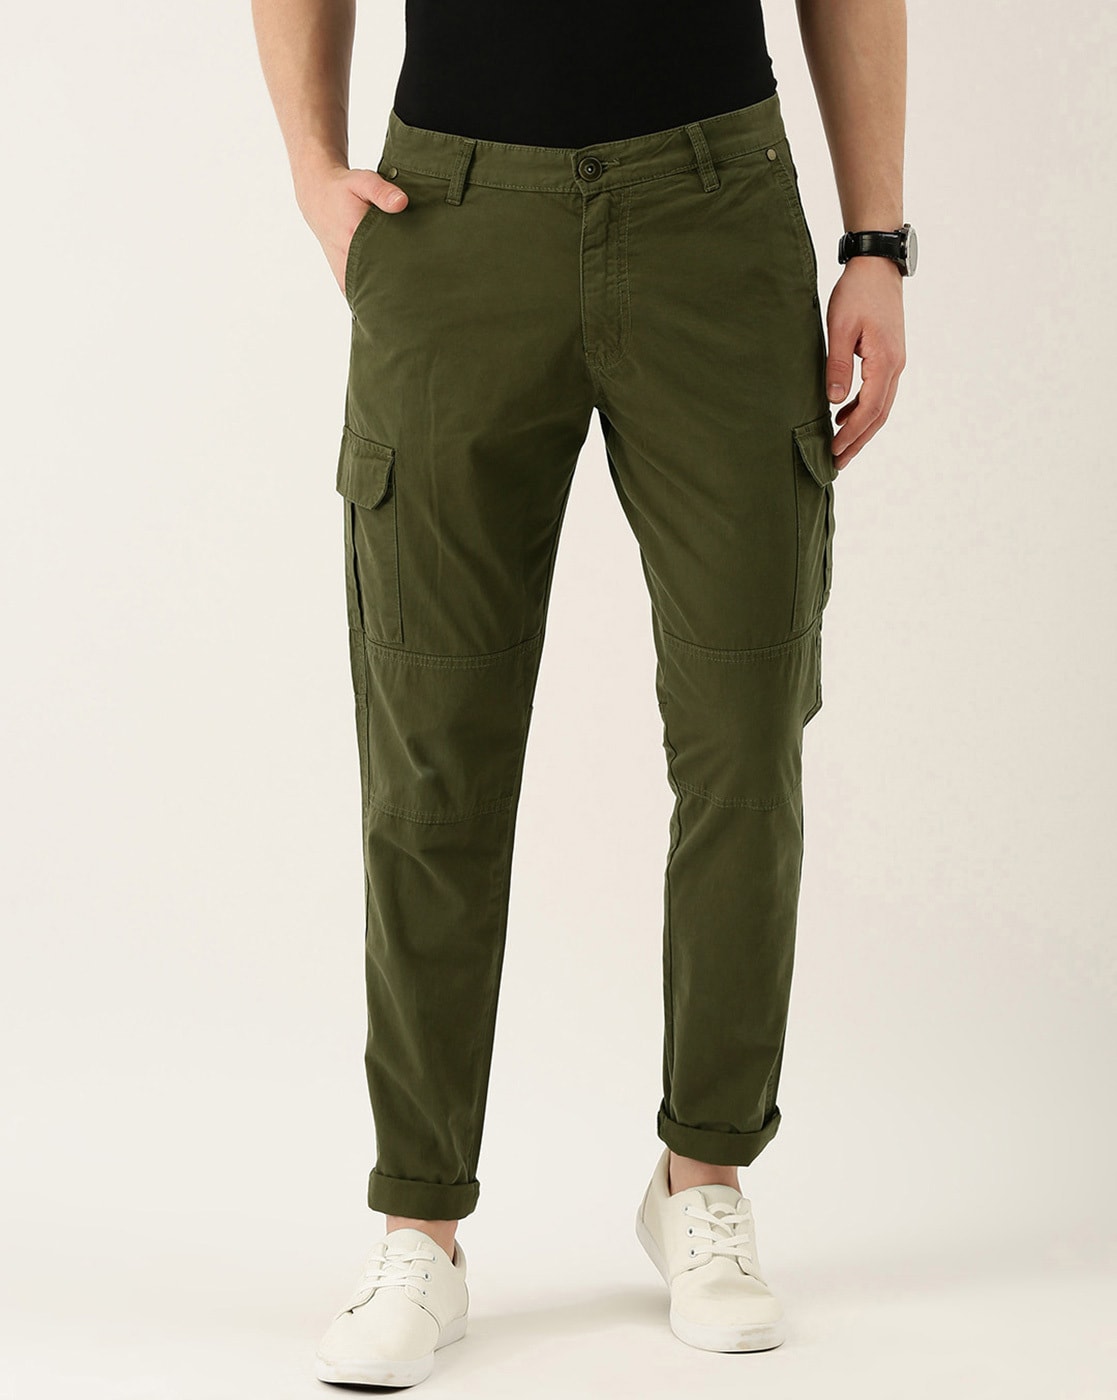 XFLWAM Men's Cargo Cargo Lightweight Work Pants Hiking Ripstop Cargo Pants  Relaxed Fit Mens Cargo Pant-Reg and Big and Tall Sizes Army Green 5XL -  Walmart.com